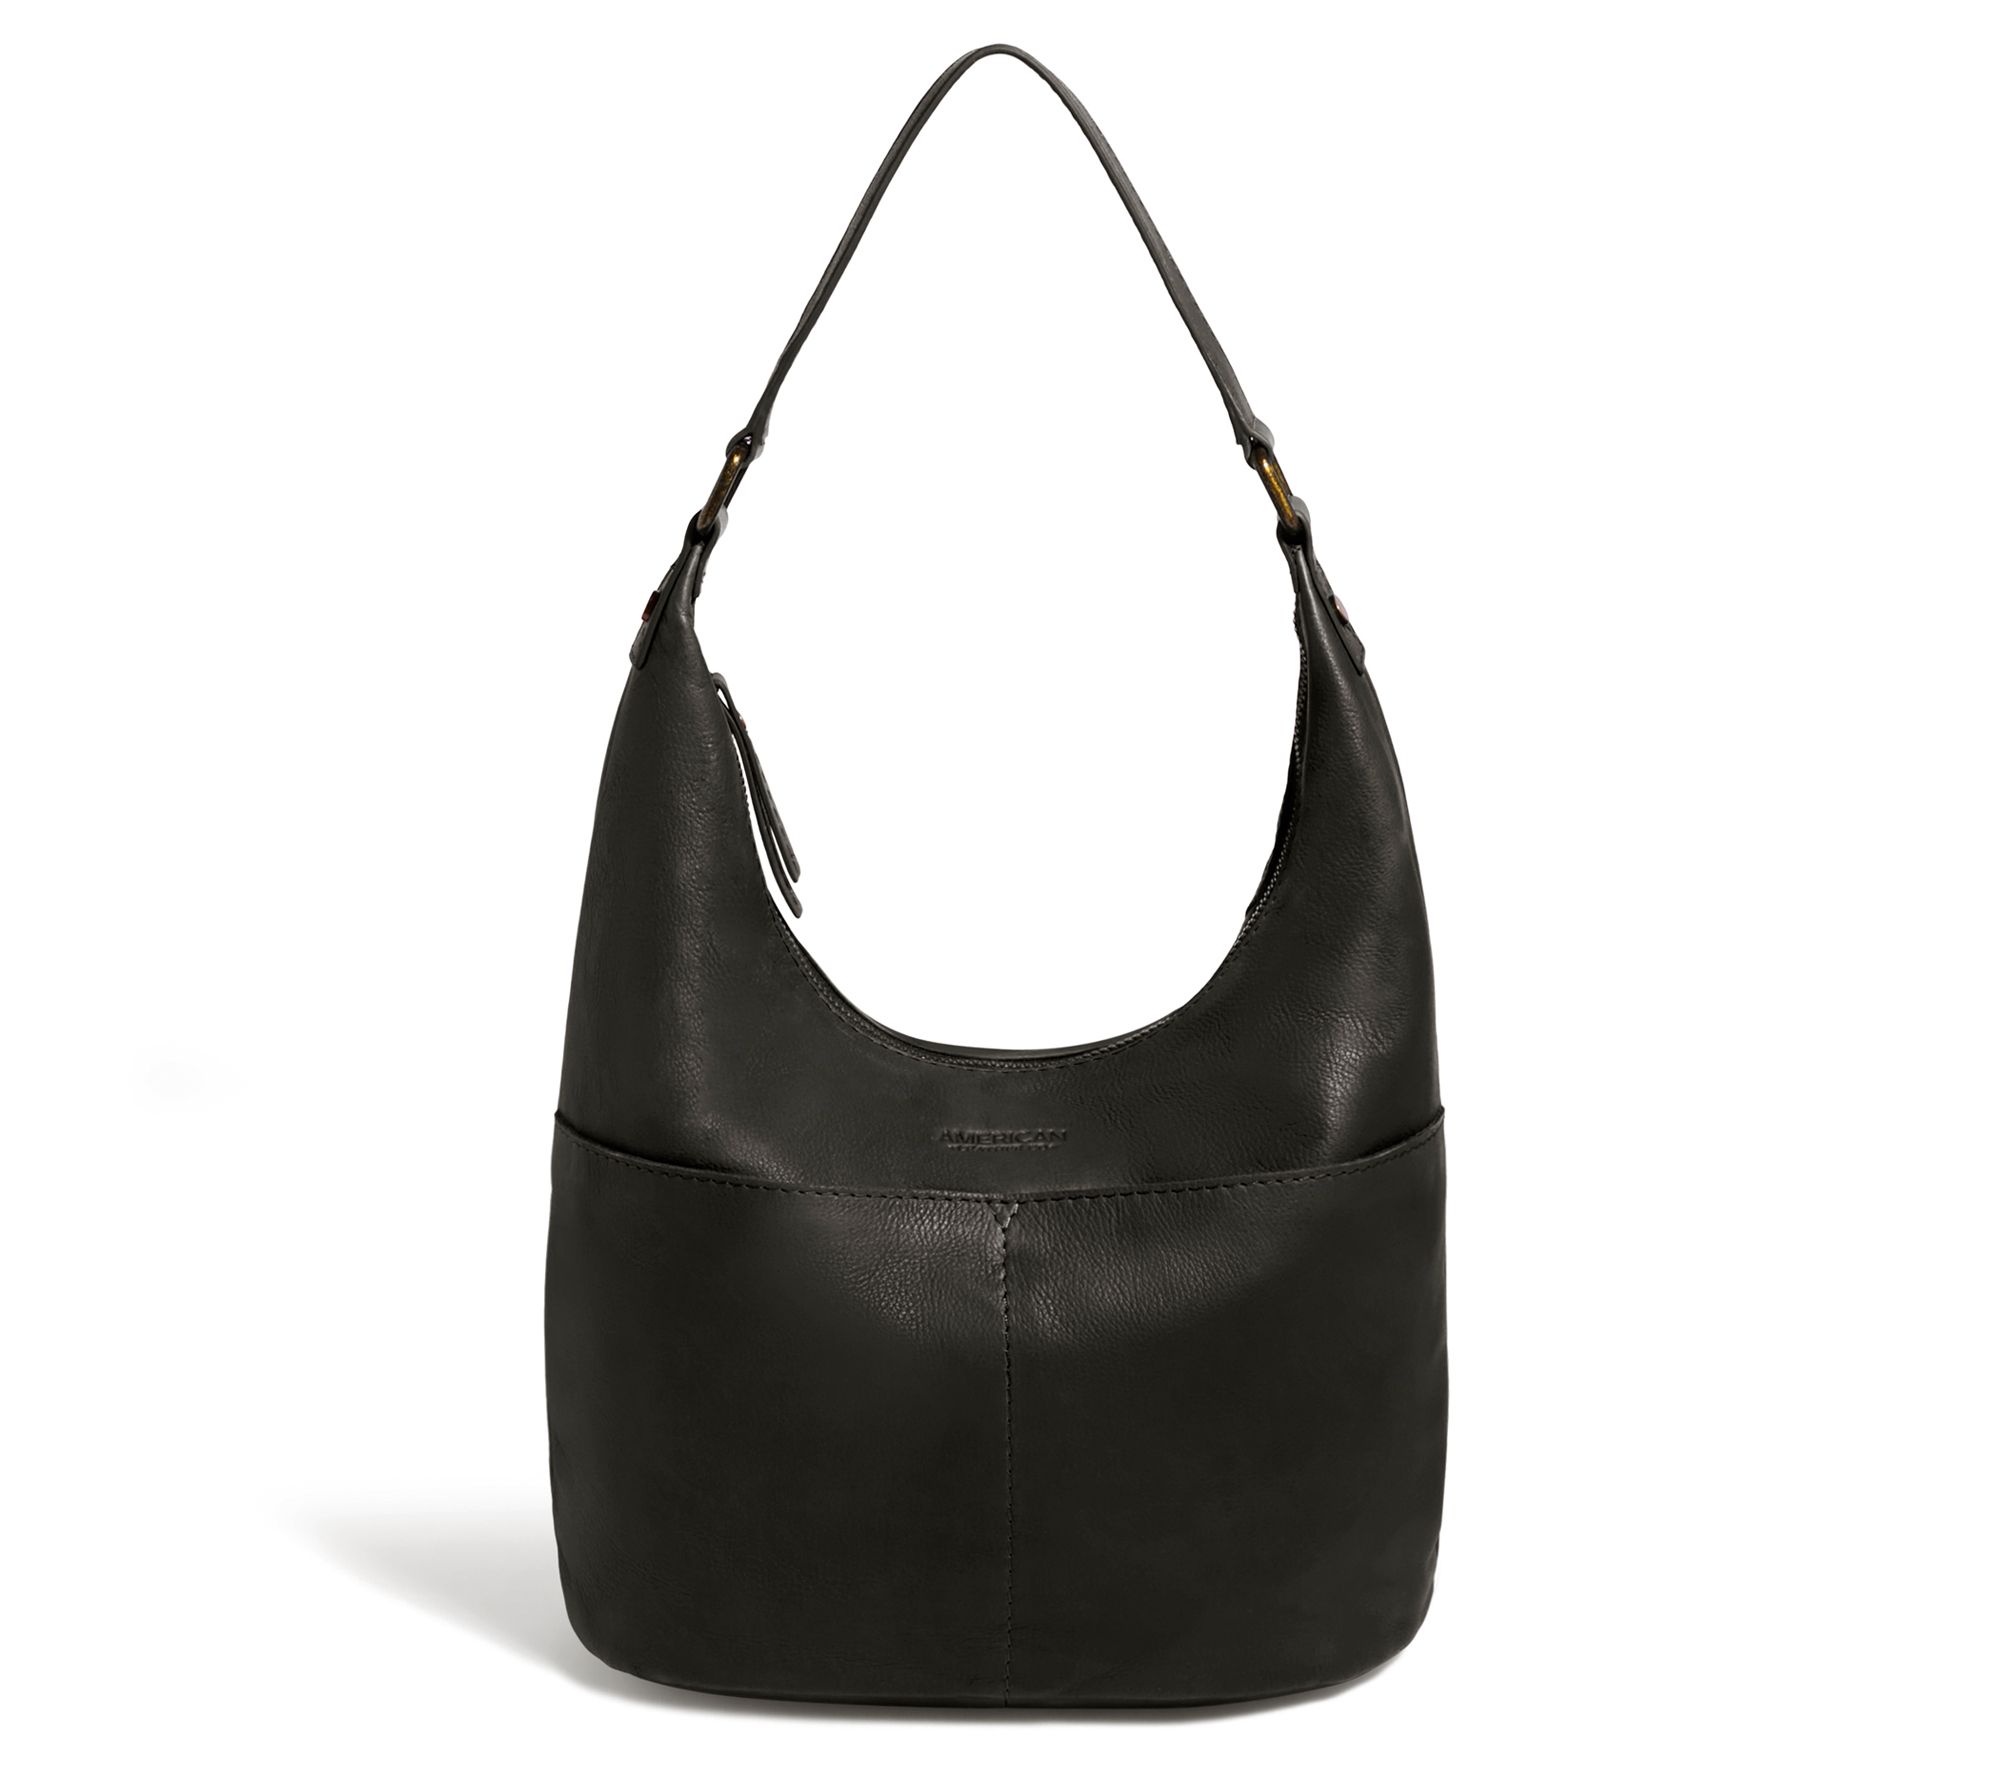 American Leather Co. Leather and Suede Shopper - Brookfield on QVC 